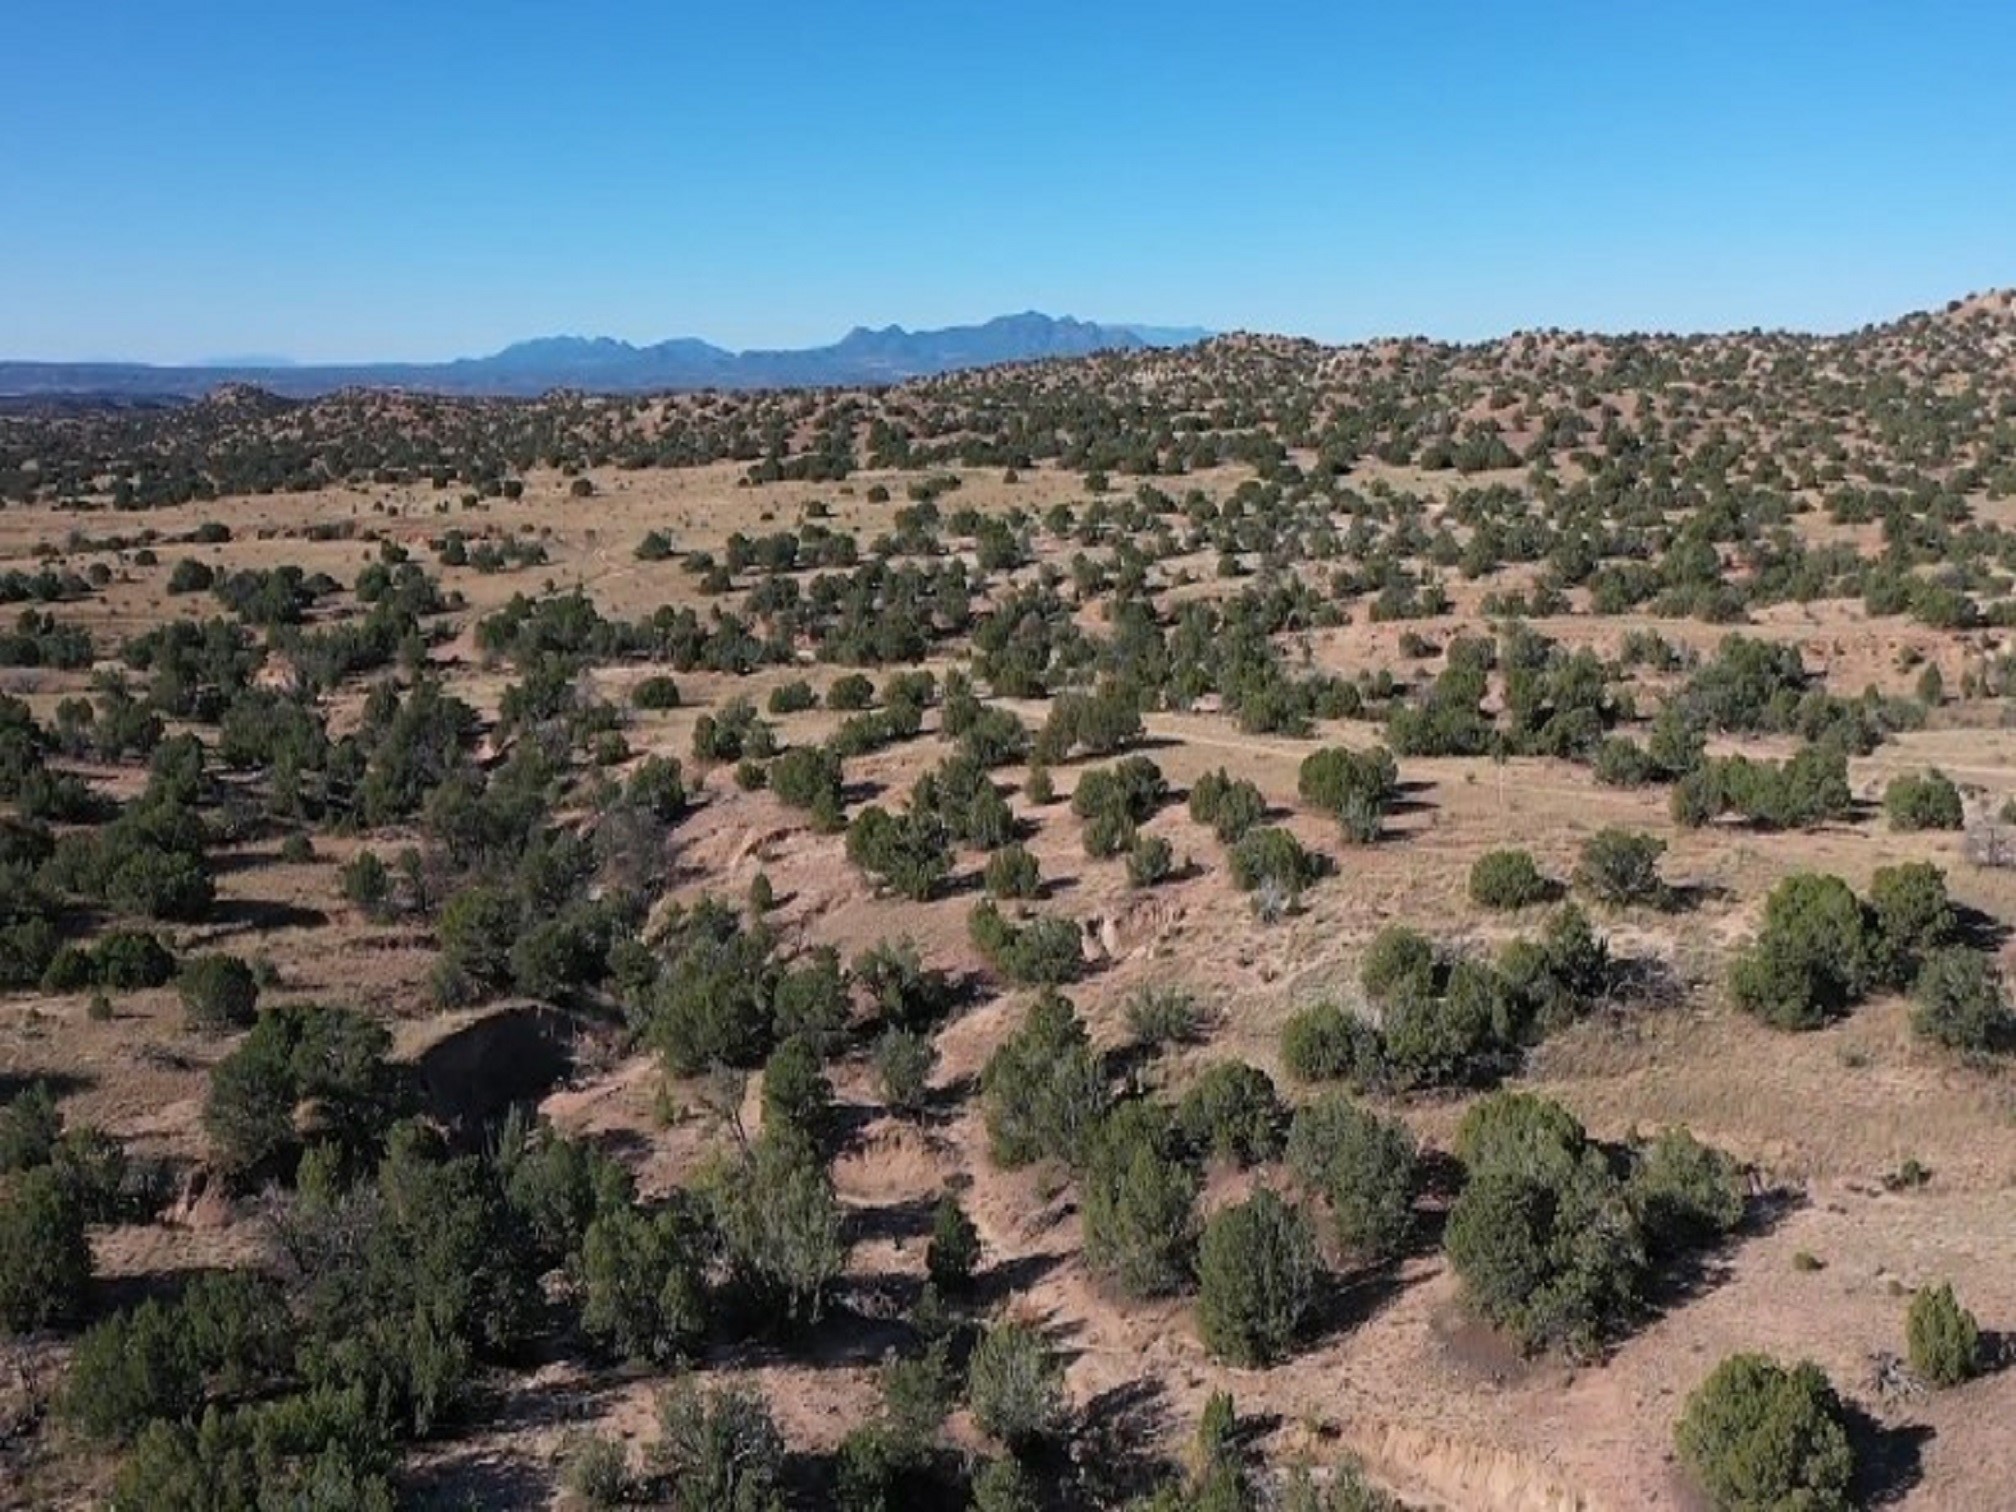 63 Southern Crescent Road Lot 21, Lamy, New Mexico 87540, ,Land,For Sale,63 Southern Crescent Road Lot 21,202233542